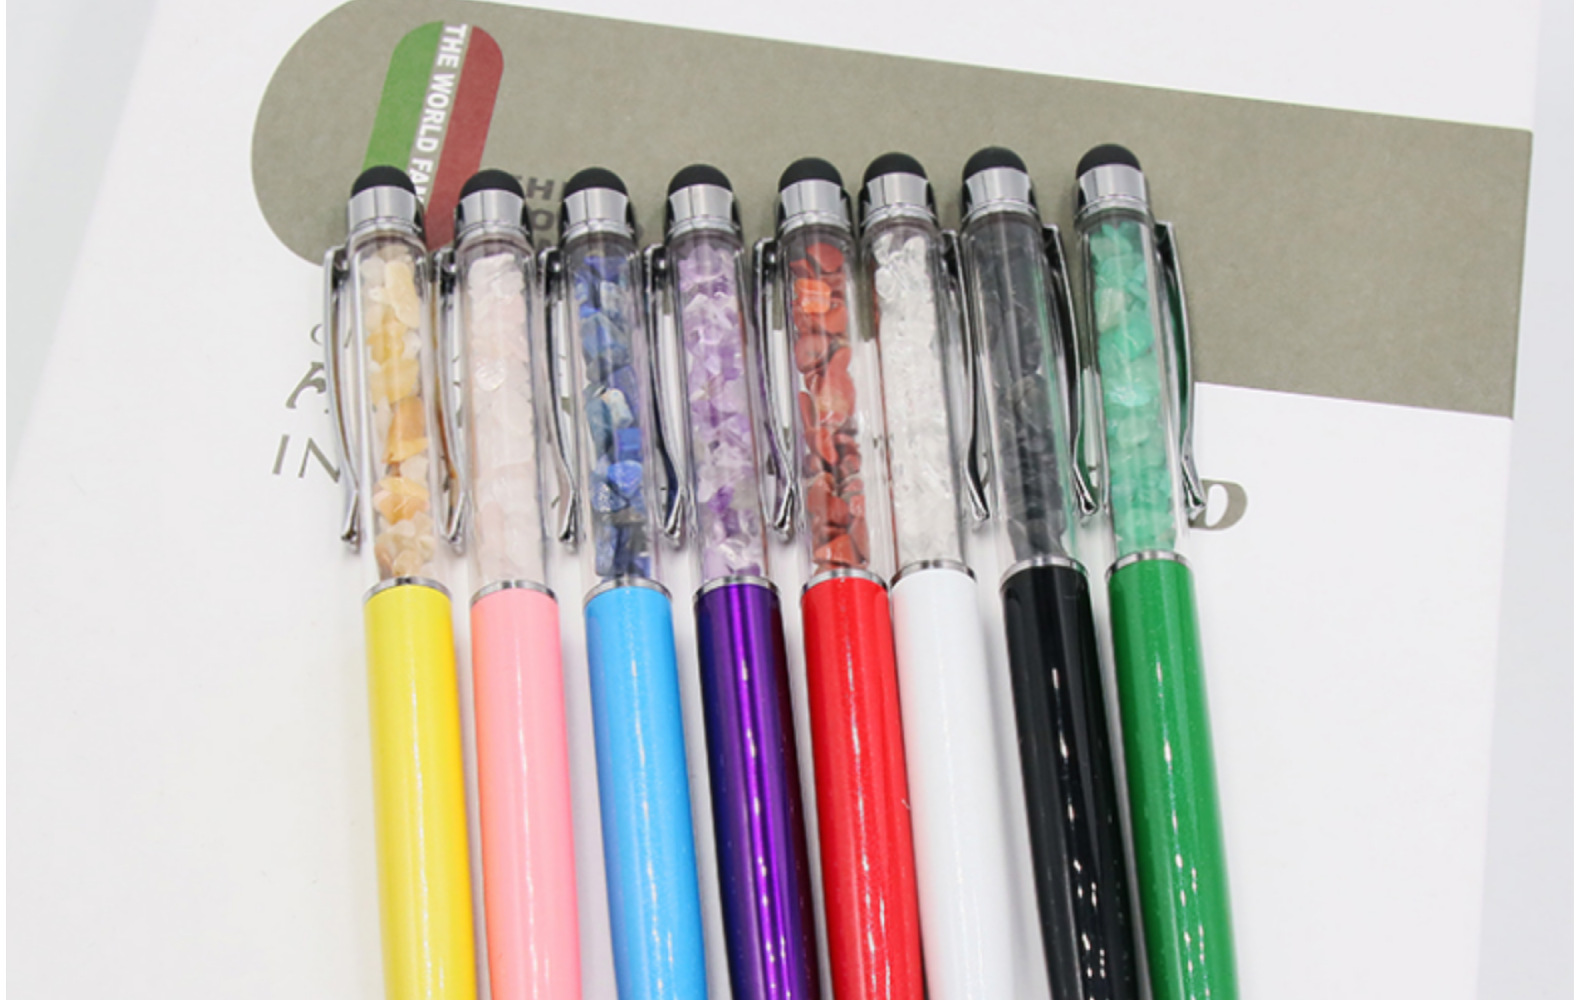 Natural Crystal Agate Jade Gravel Gem Ballpoint Pen Capacitor Touchscreen Stylus Advertising Hand-held Gift Student Cross-border display picture 2